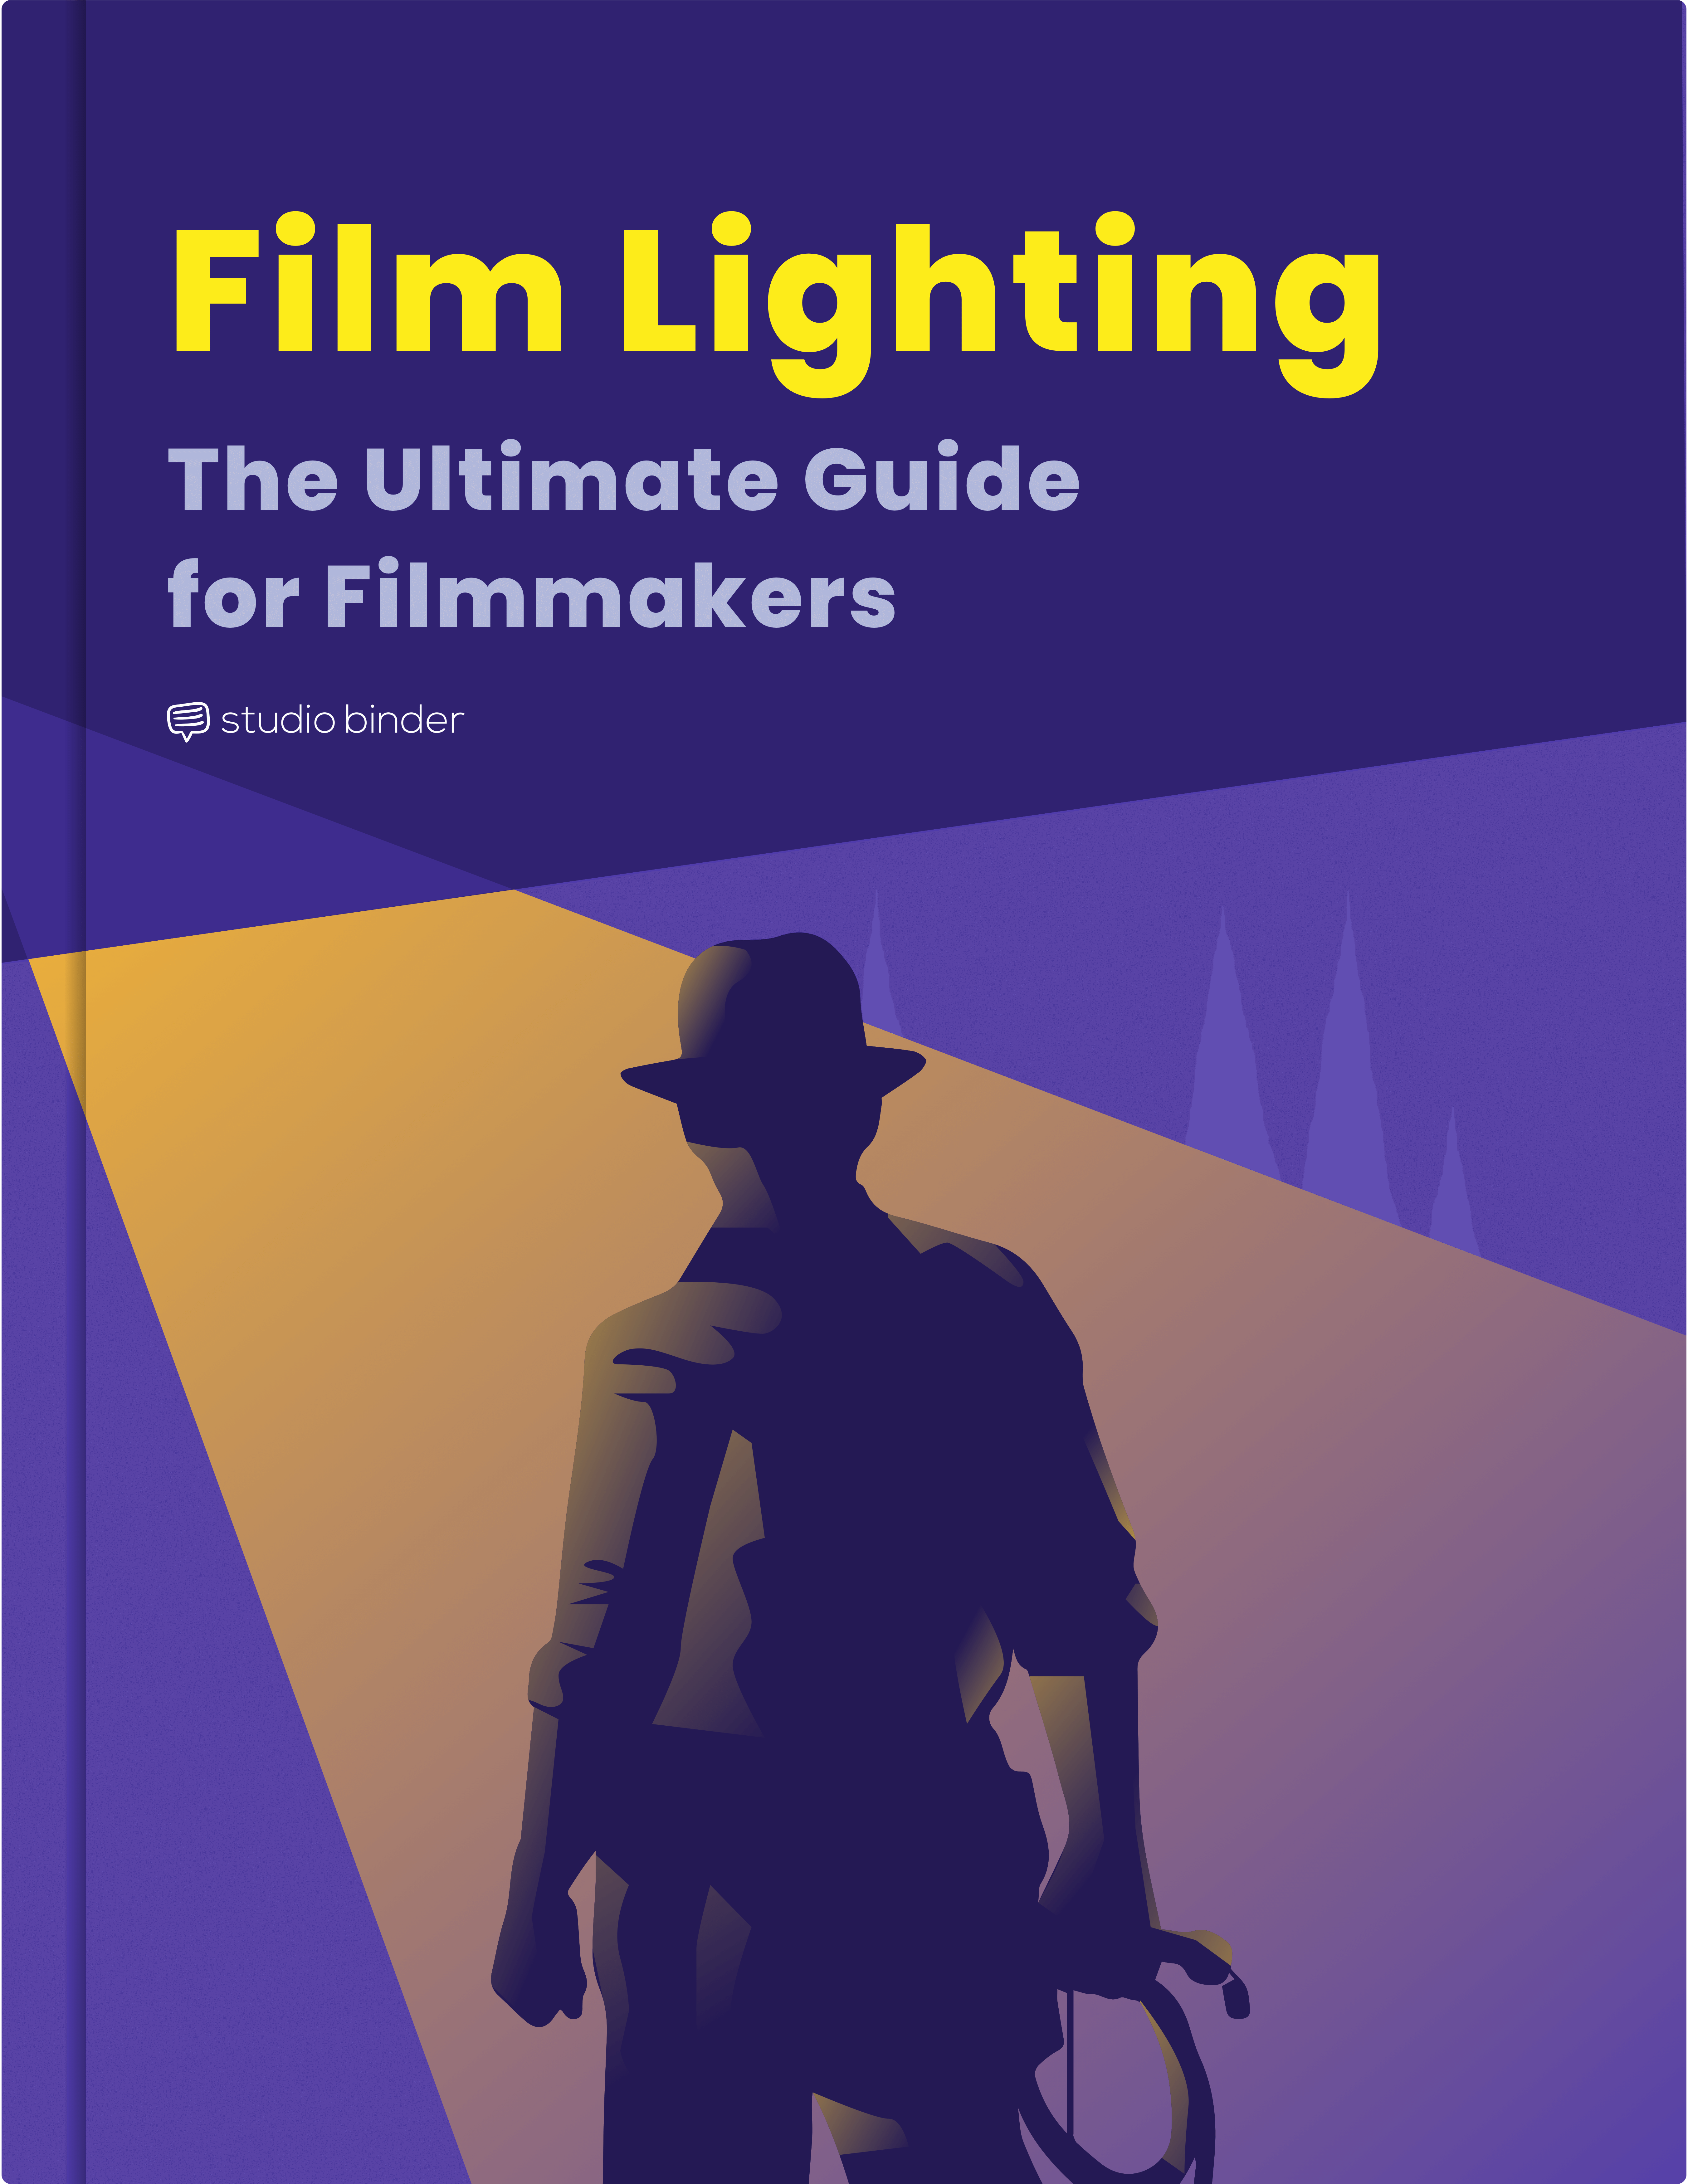 Film Lighting The Ultimate Guide for Filmmakers Cover Final